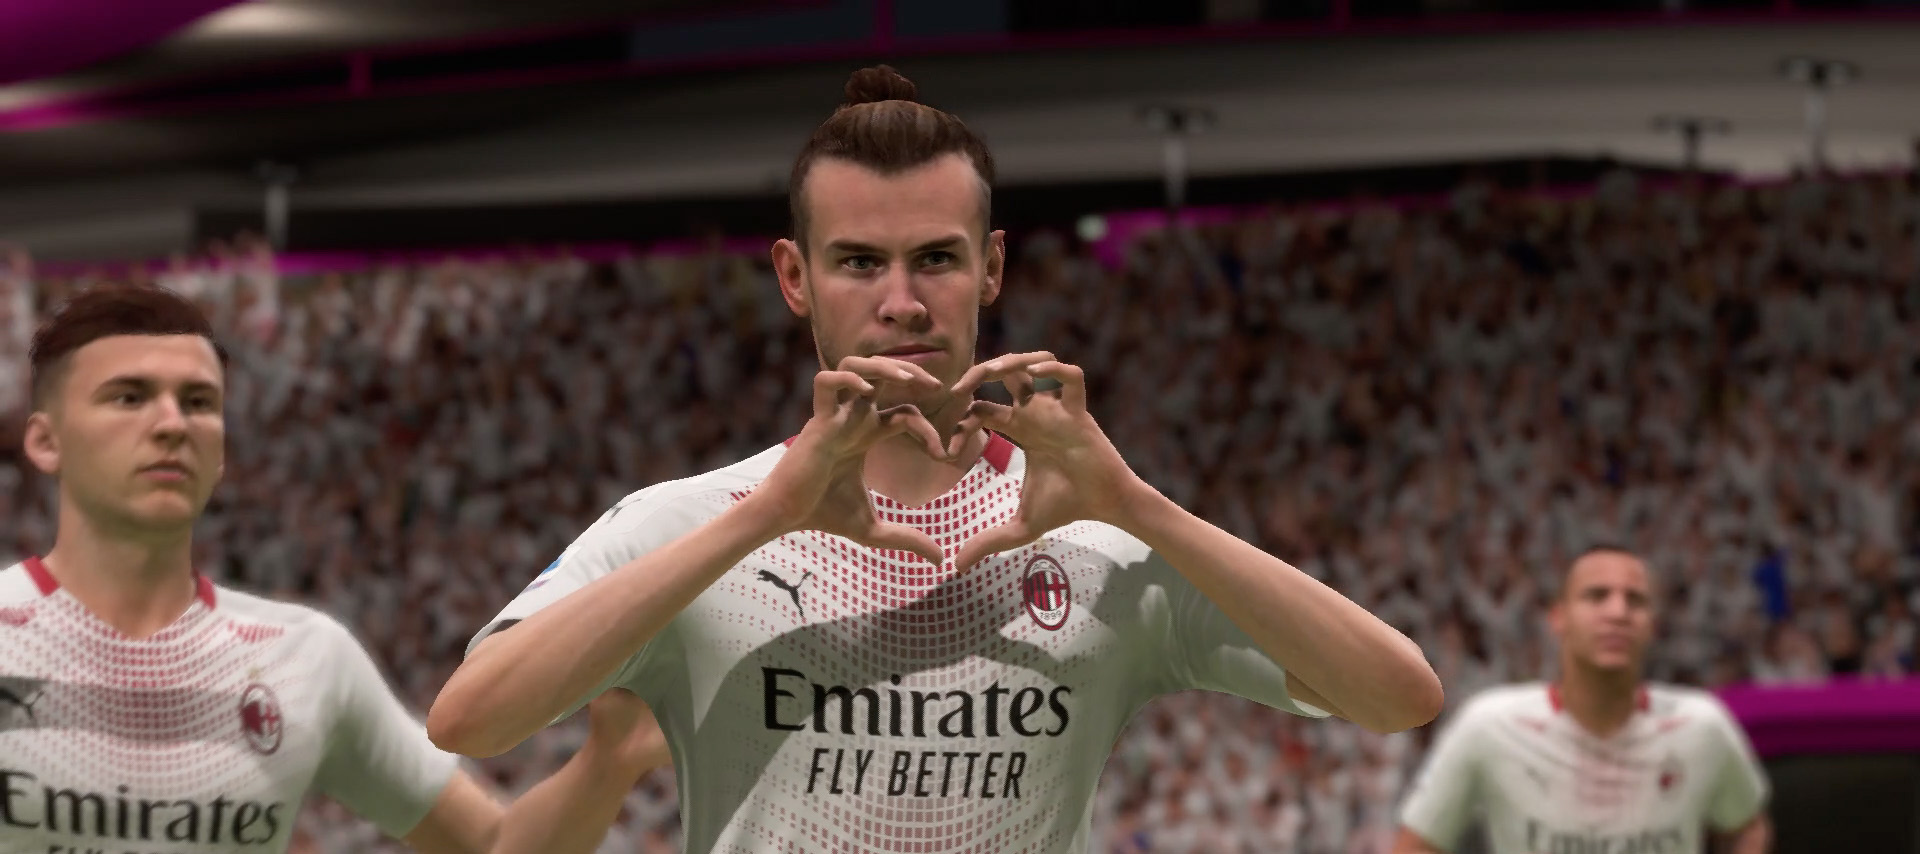 FIFA 21 tackling ratings: Who are the best-rated players on the